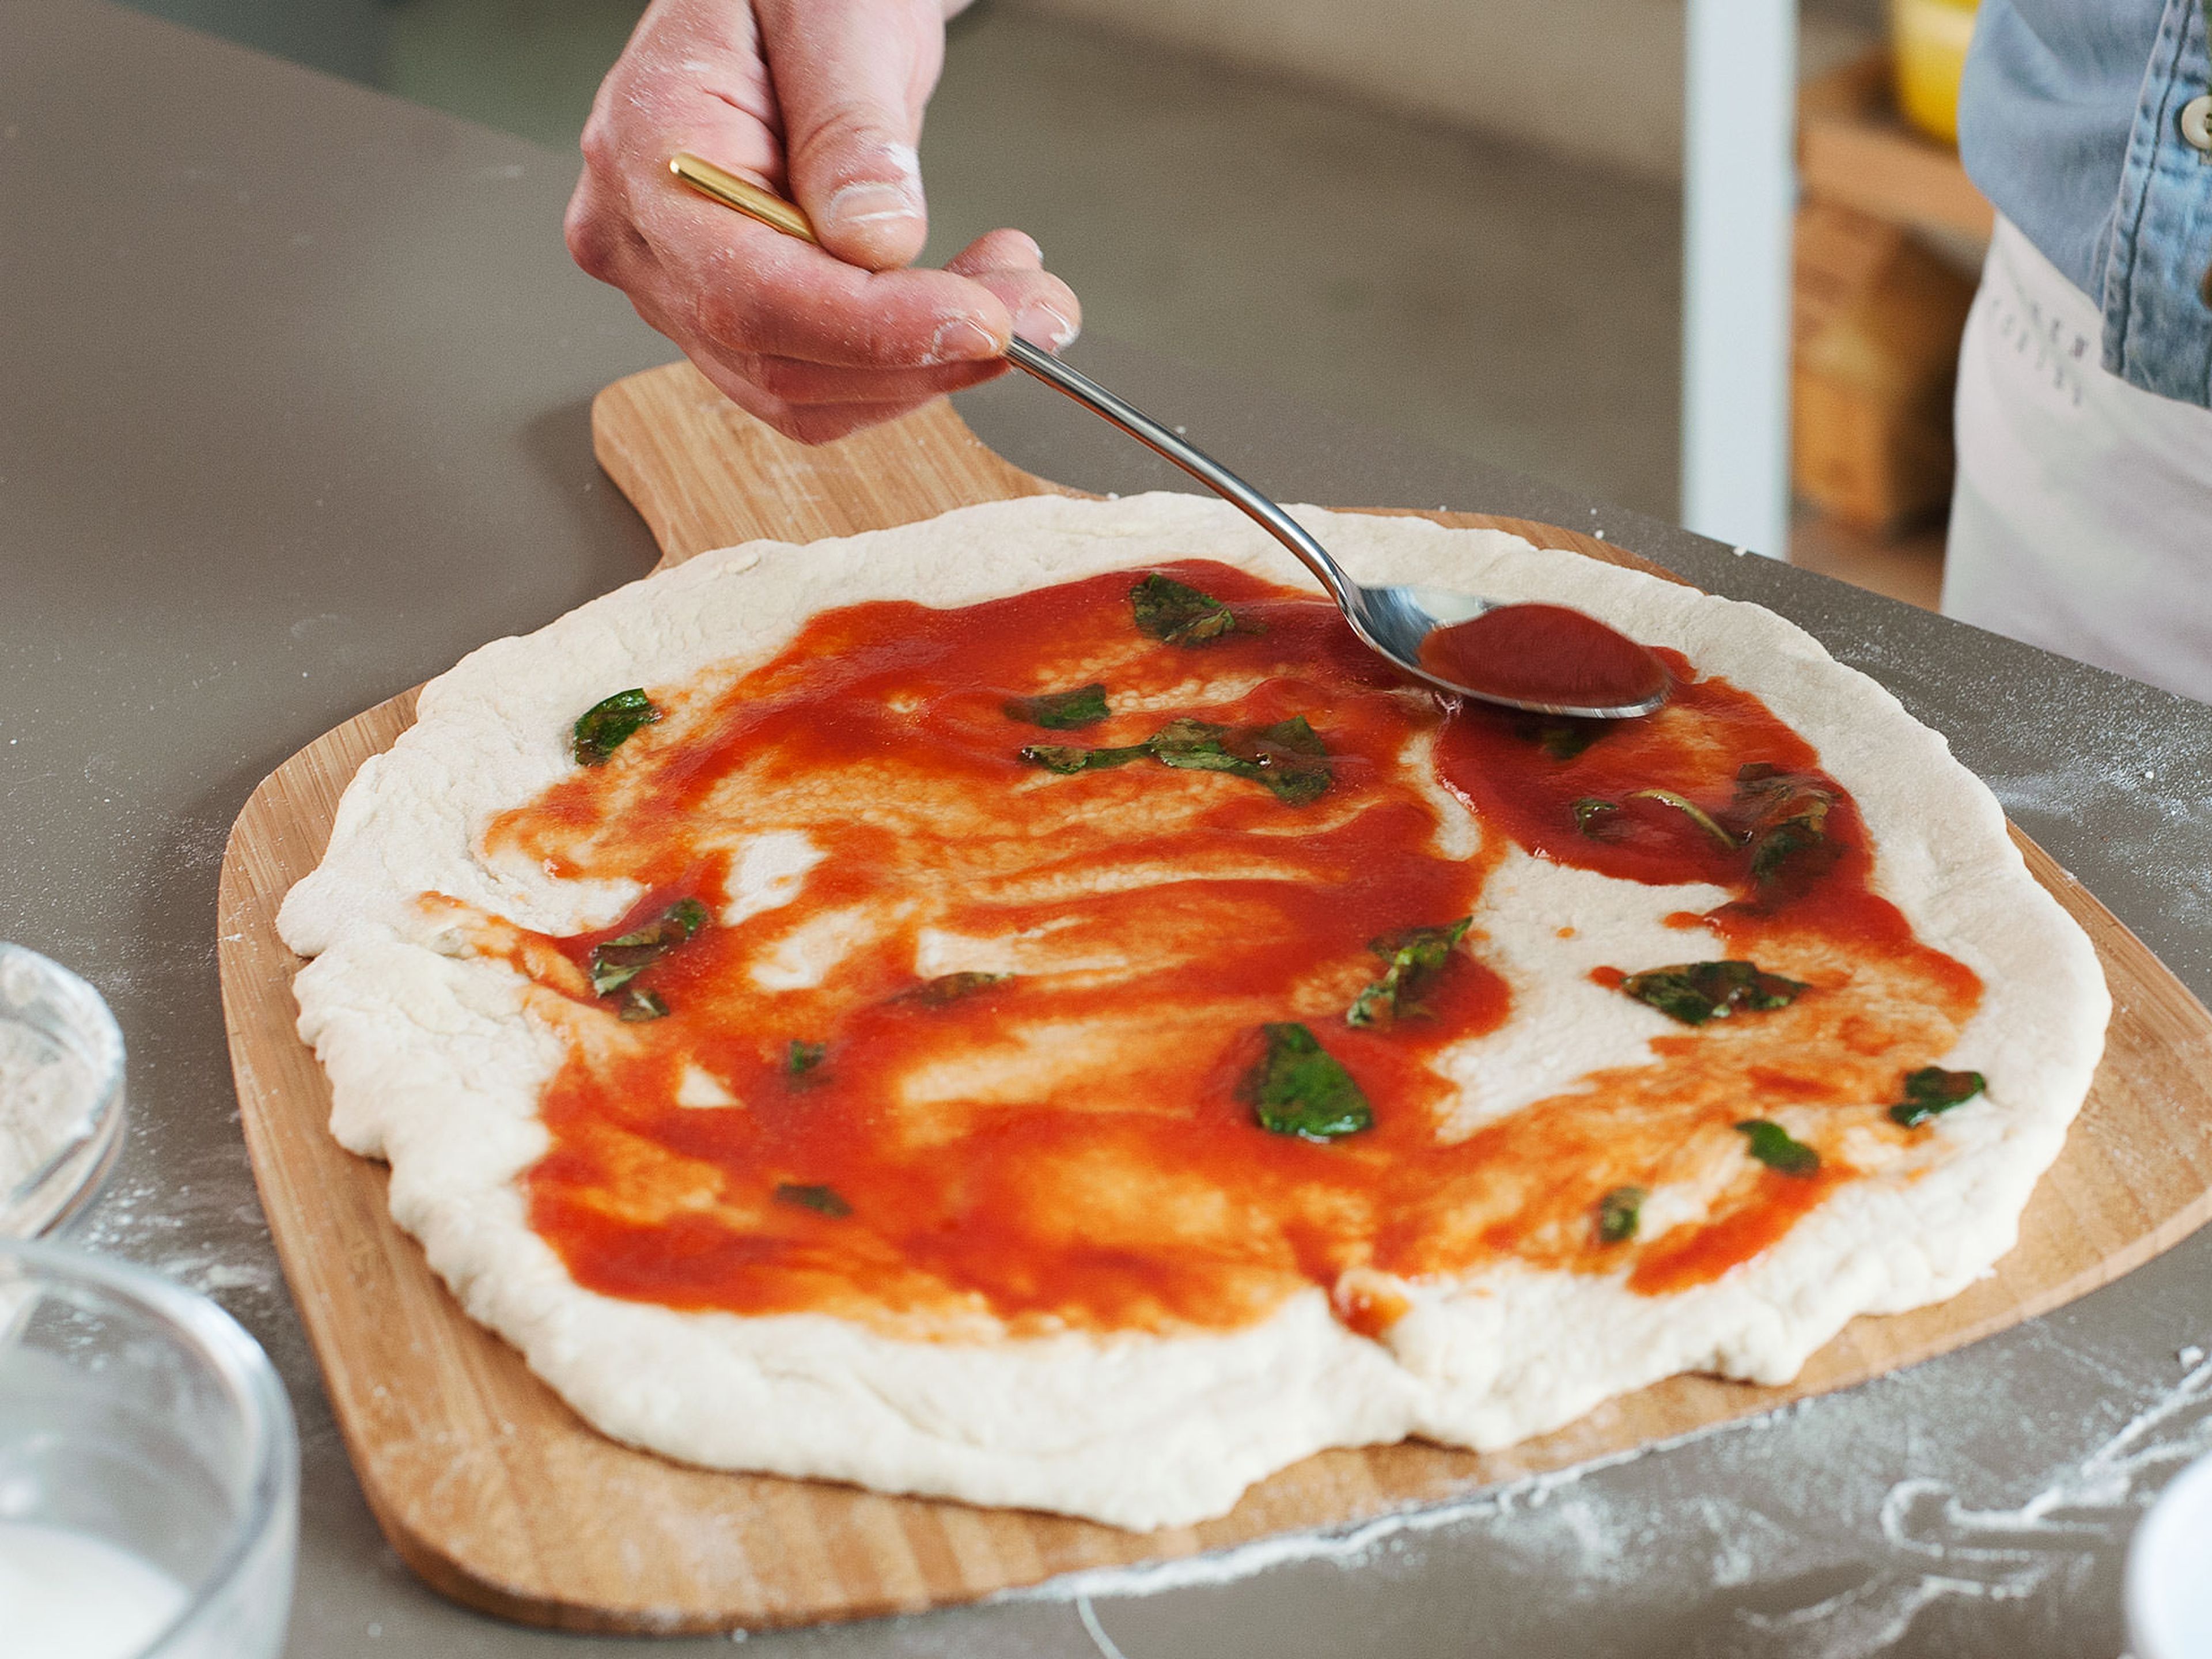 In a small bowl, mix together tomato purée, olive oil, and salt. Roughly tear up basil leaves and add them to sauce. Spread a thin layer over pizza, transfer to pizza stone, and bake in preheated oven at 250°C/480°F for approx. 6 – 7 min.